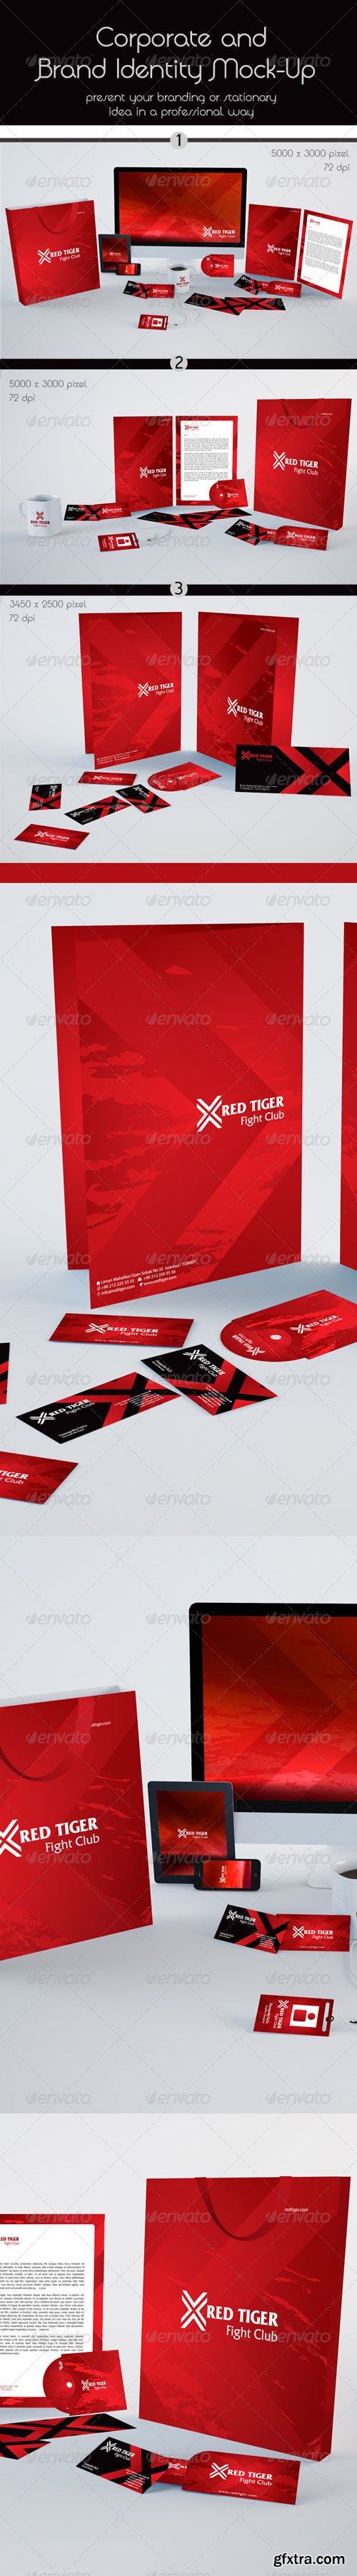 Graphicriver - Corporate and Stationery Brand Mock-Up 3392716